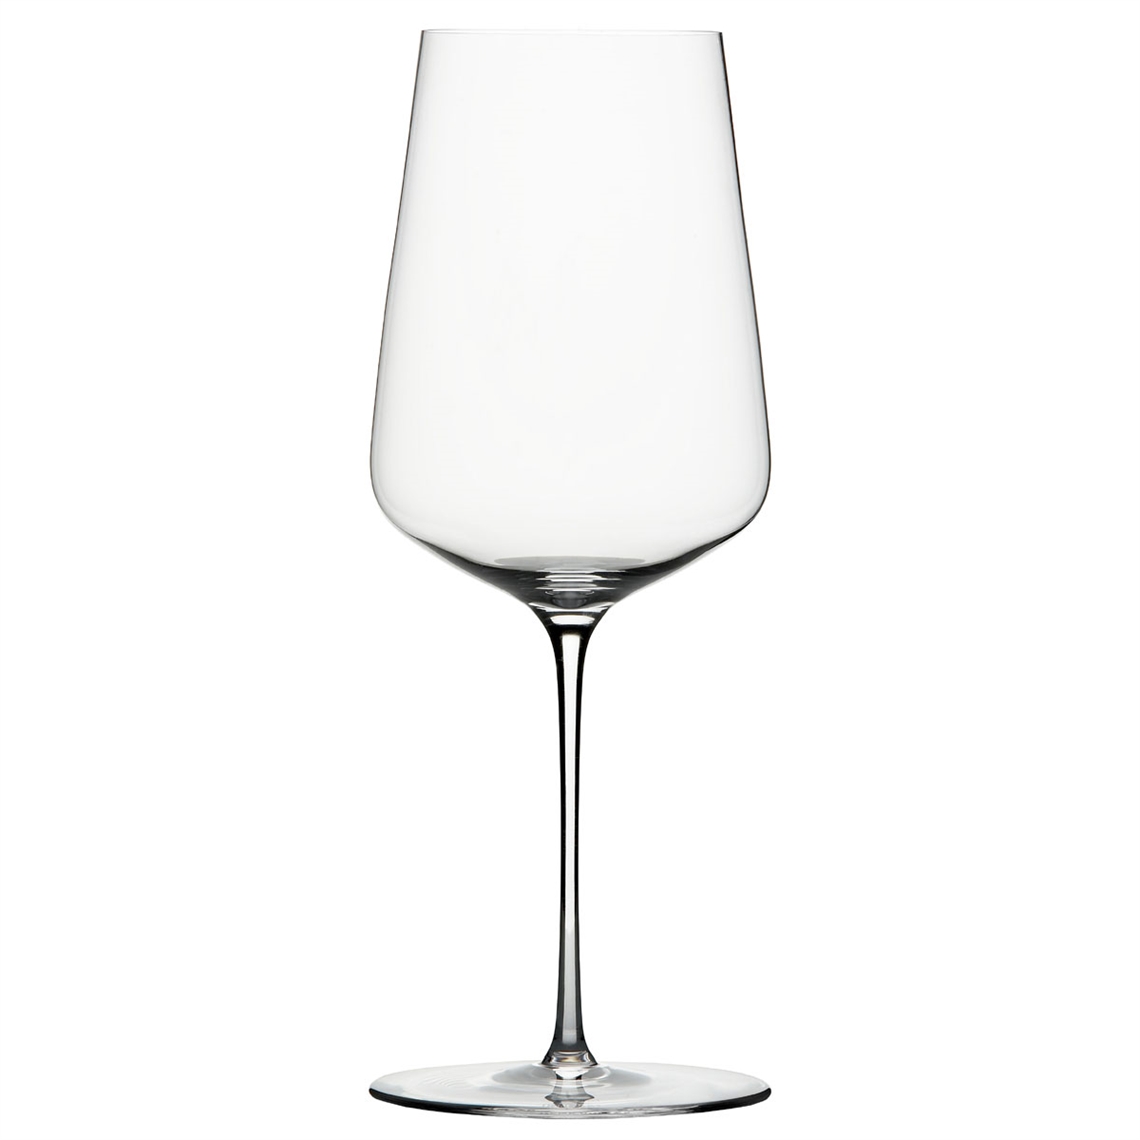 View more red wine glasses from our Crystal Wine Glasses range